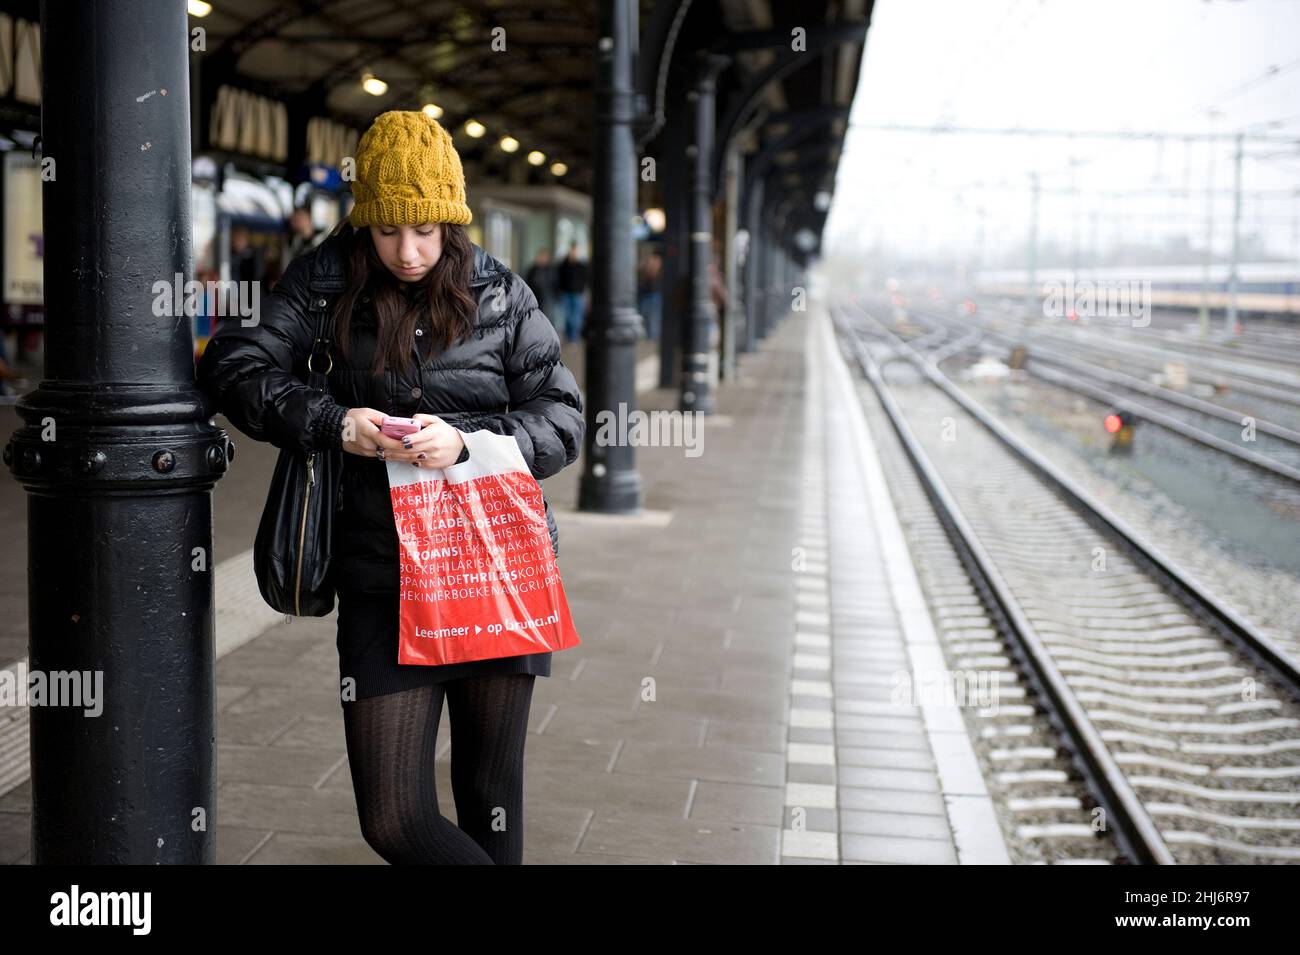 Den Bosch, 's-Hertogenbosch, Netherlands. Young adult woman leaning against a roof supporting pole on the local Railway Station while waiting for her connecting intercity train towards Breda. Stock Photo